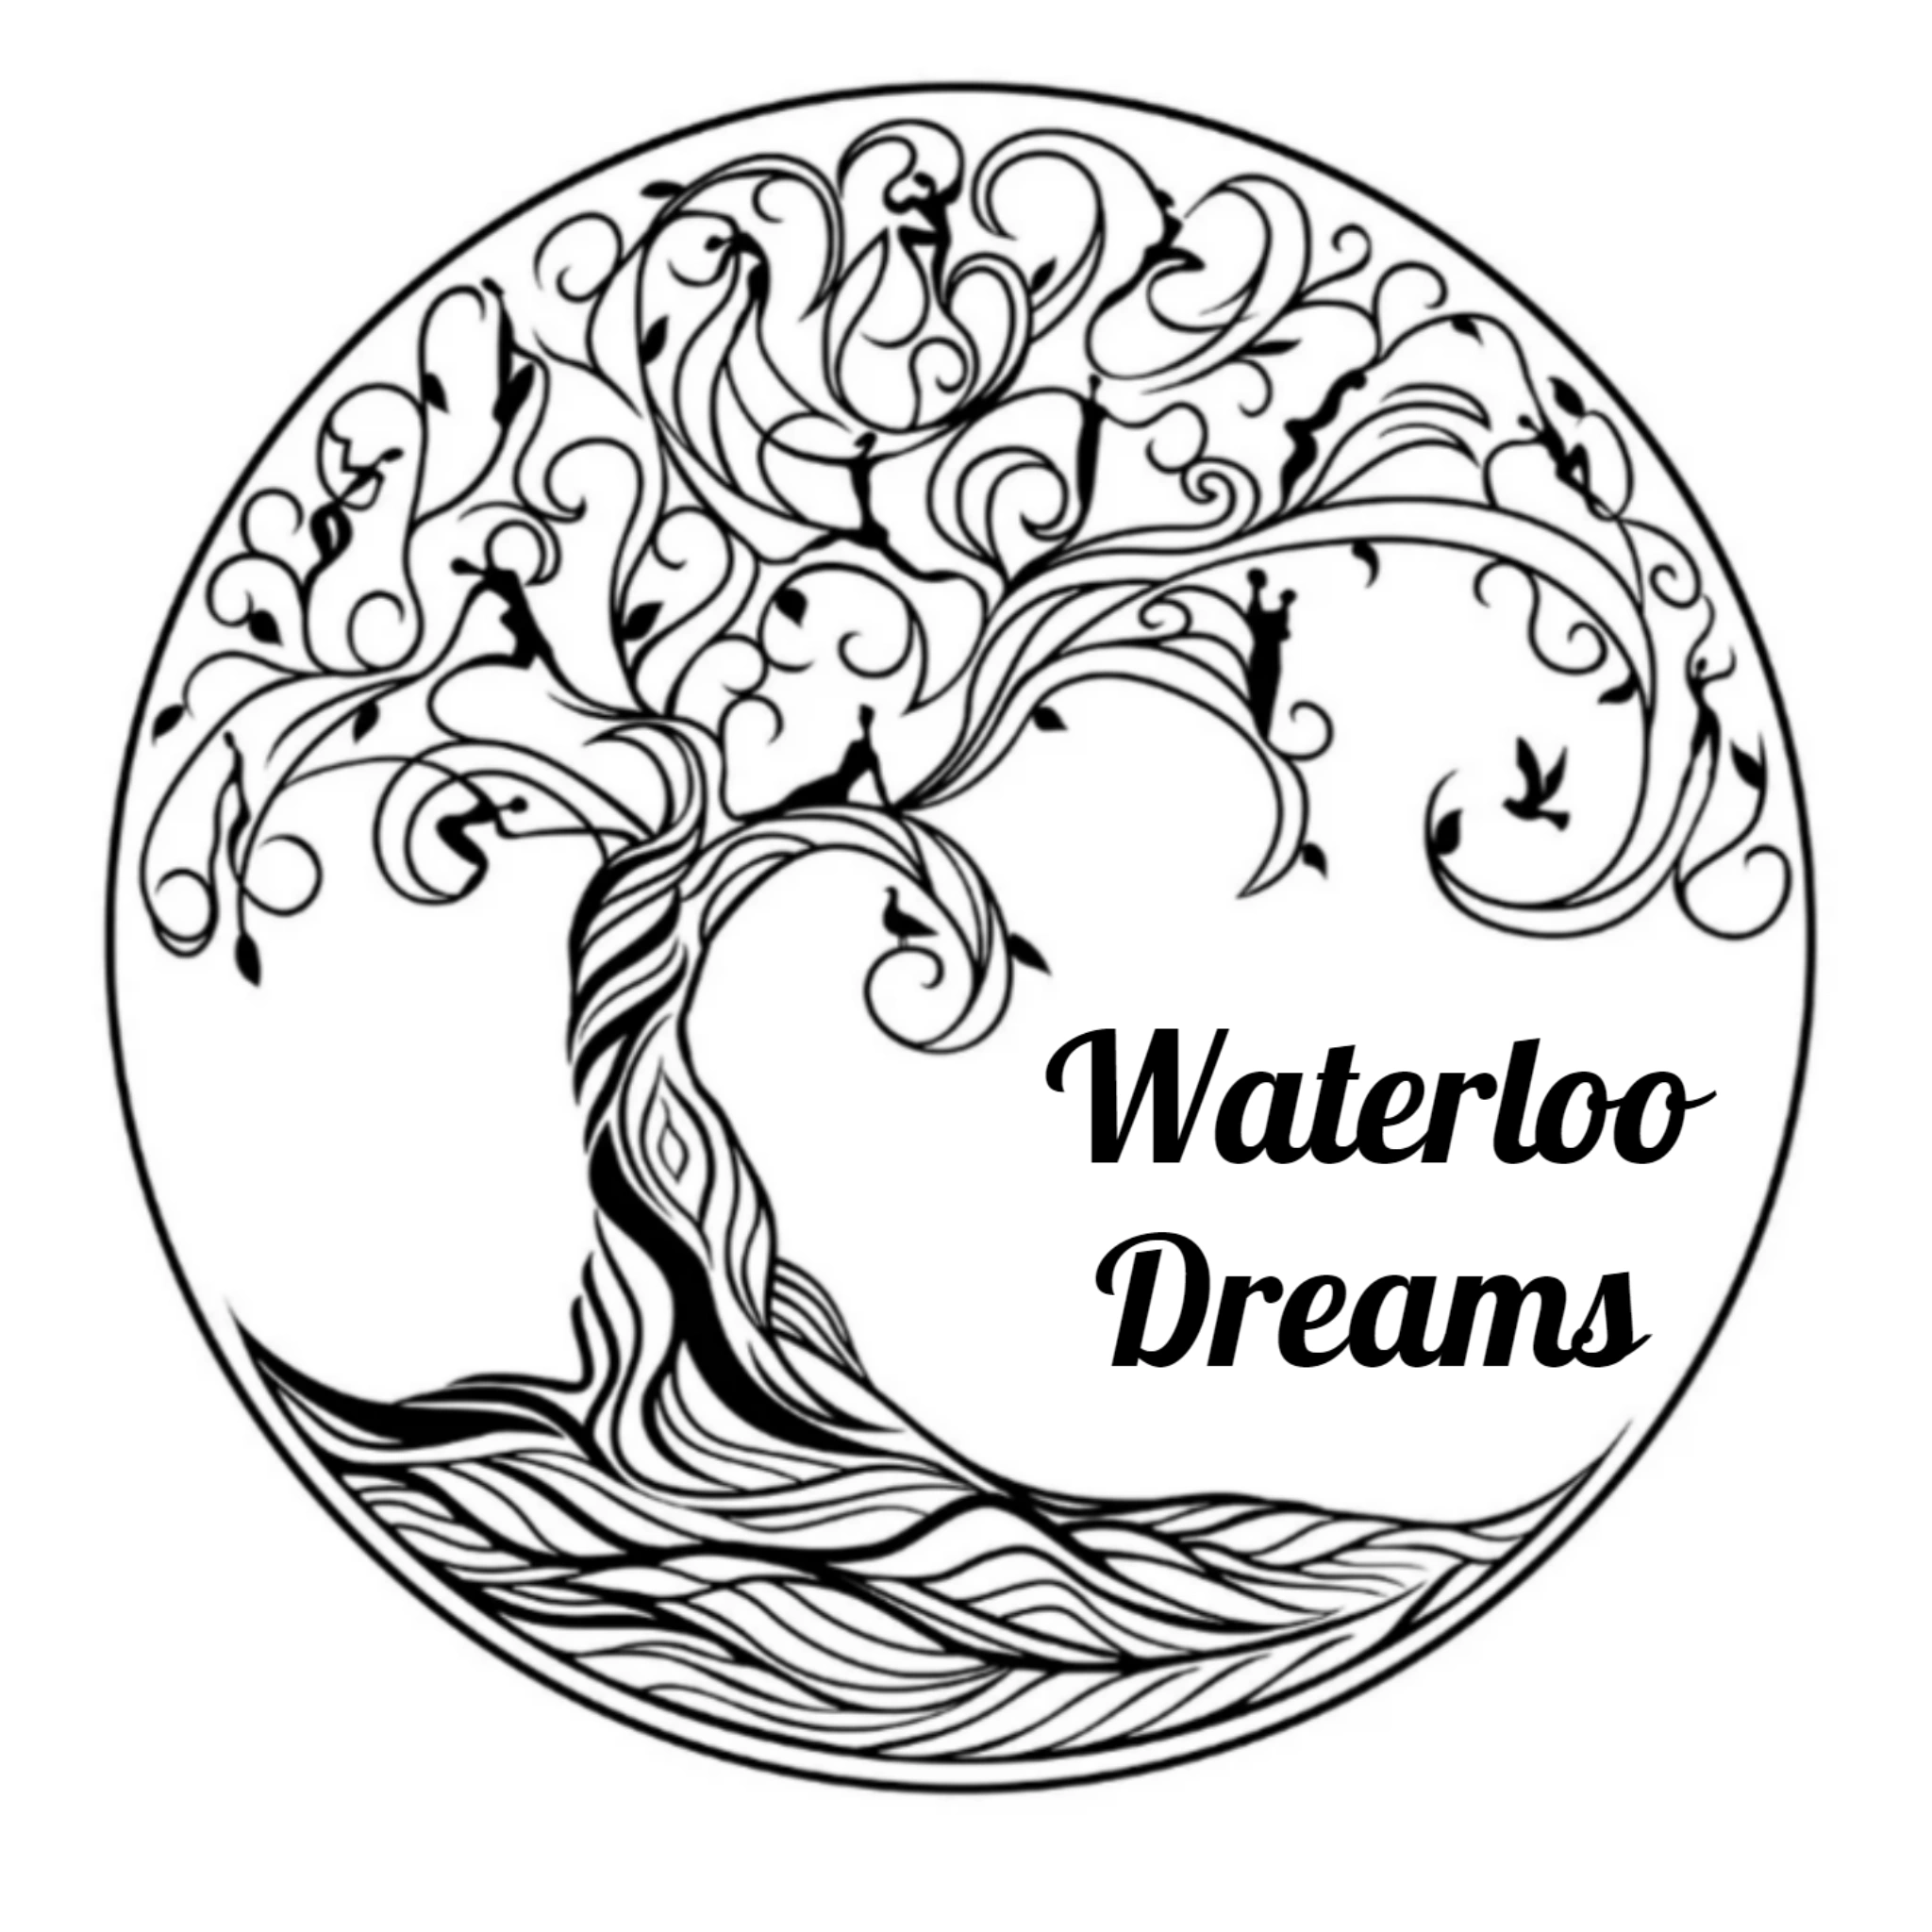 Waterloo Dreams is your place for handmade and unique items for exceptional people.